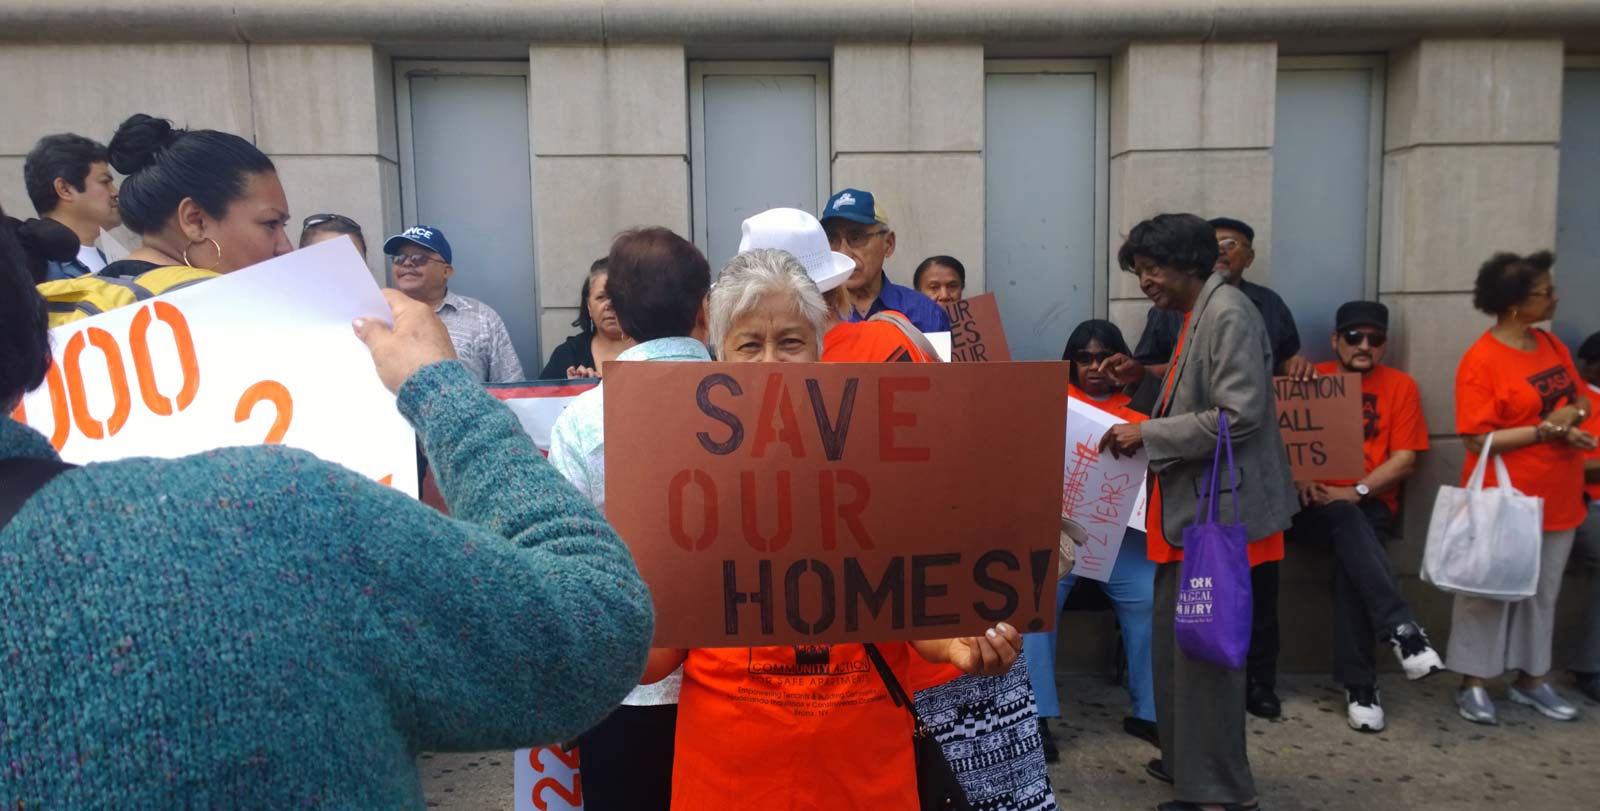 A group of Right to Counsel activists meet. One holds a sign reading Save Our Homes